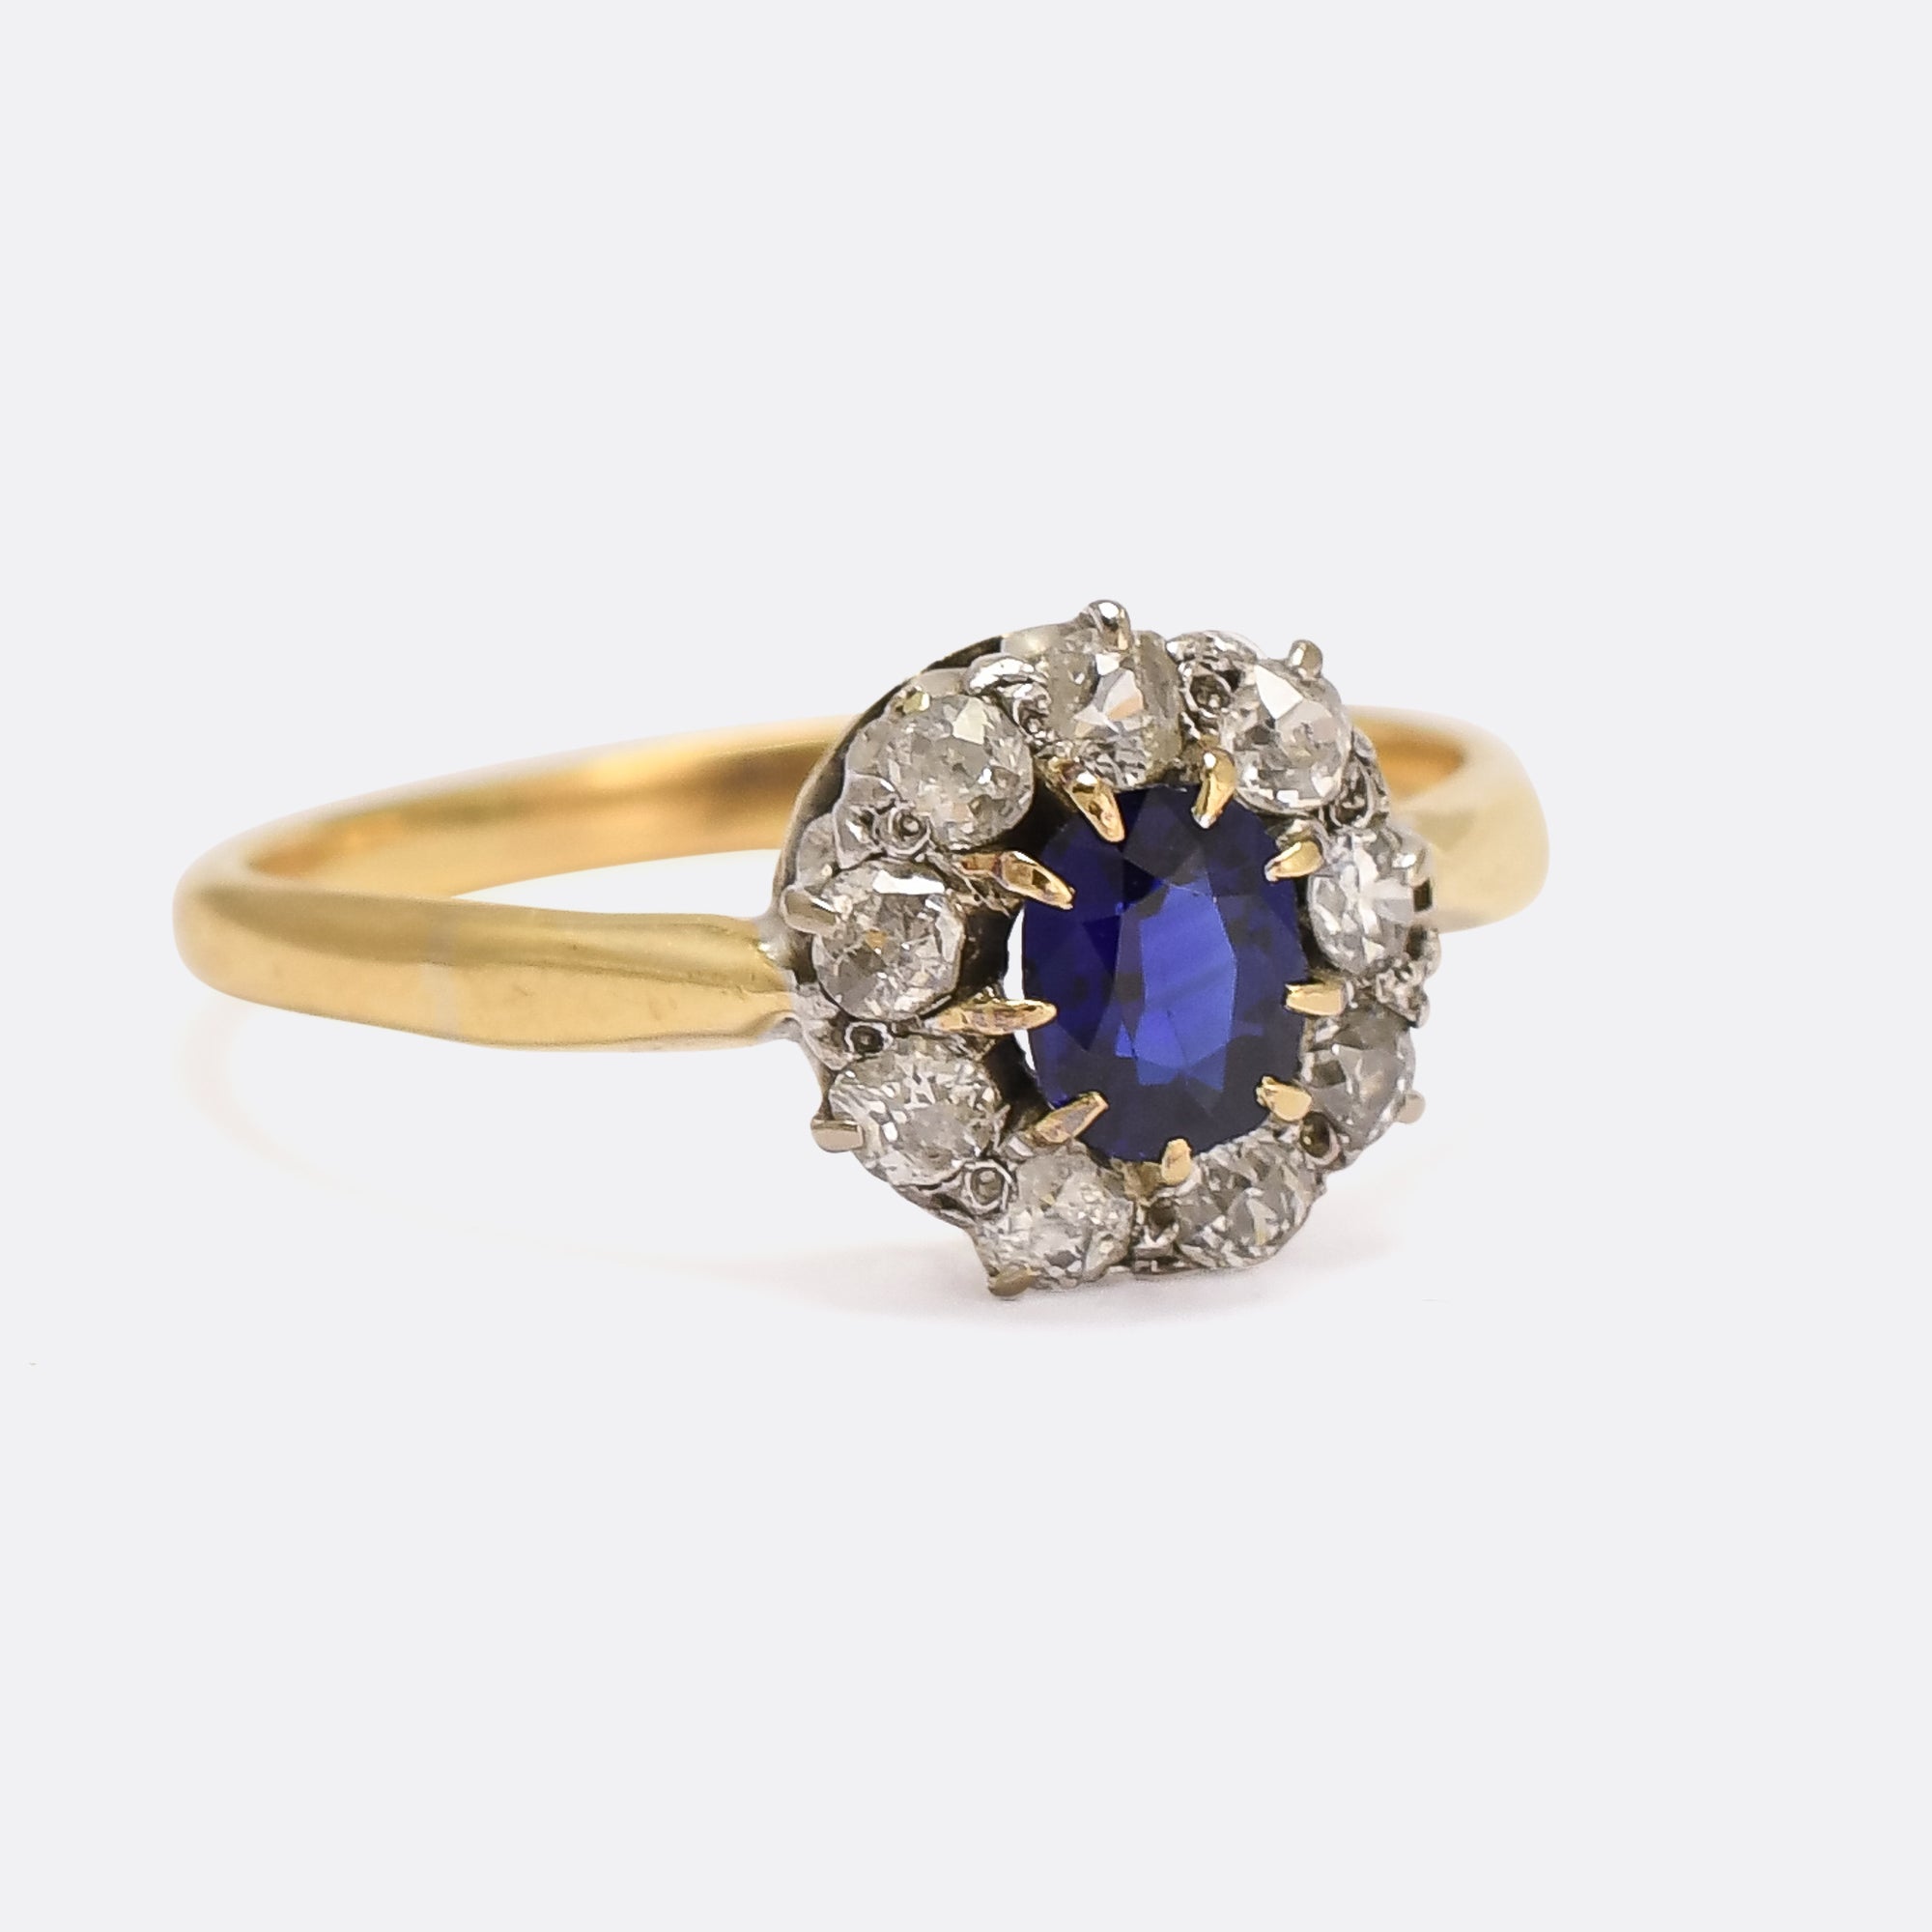 Outstanding Antique Cluster Ring – St. Eloi